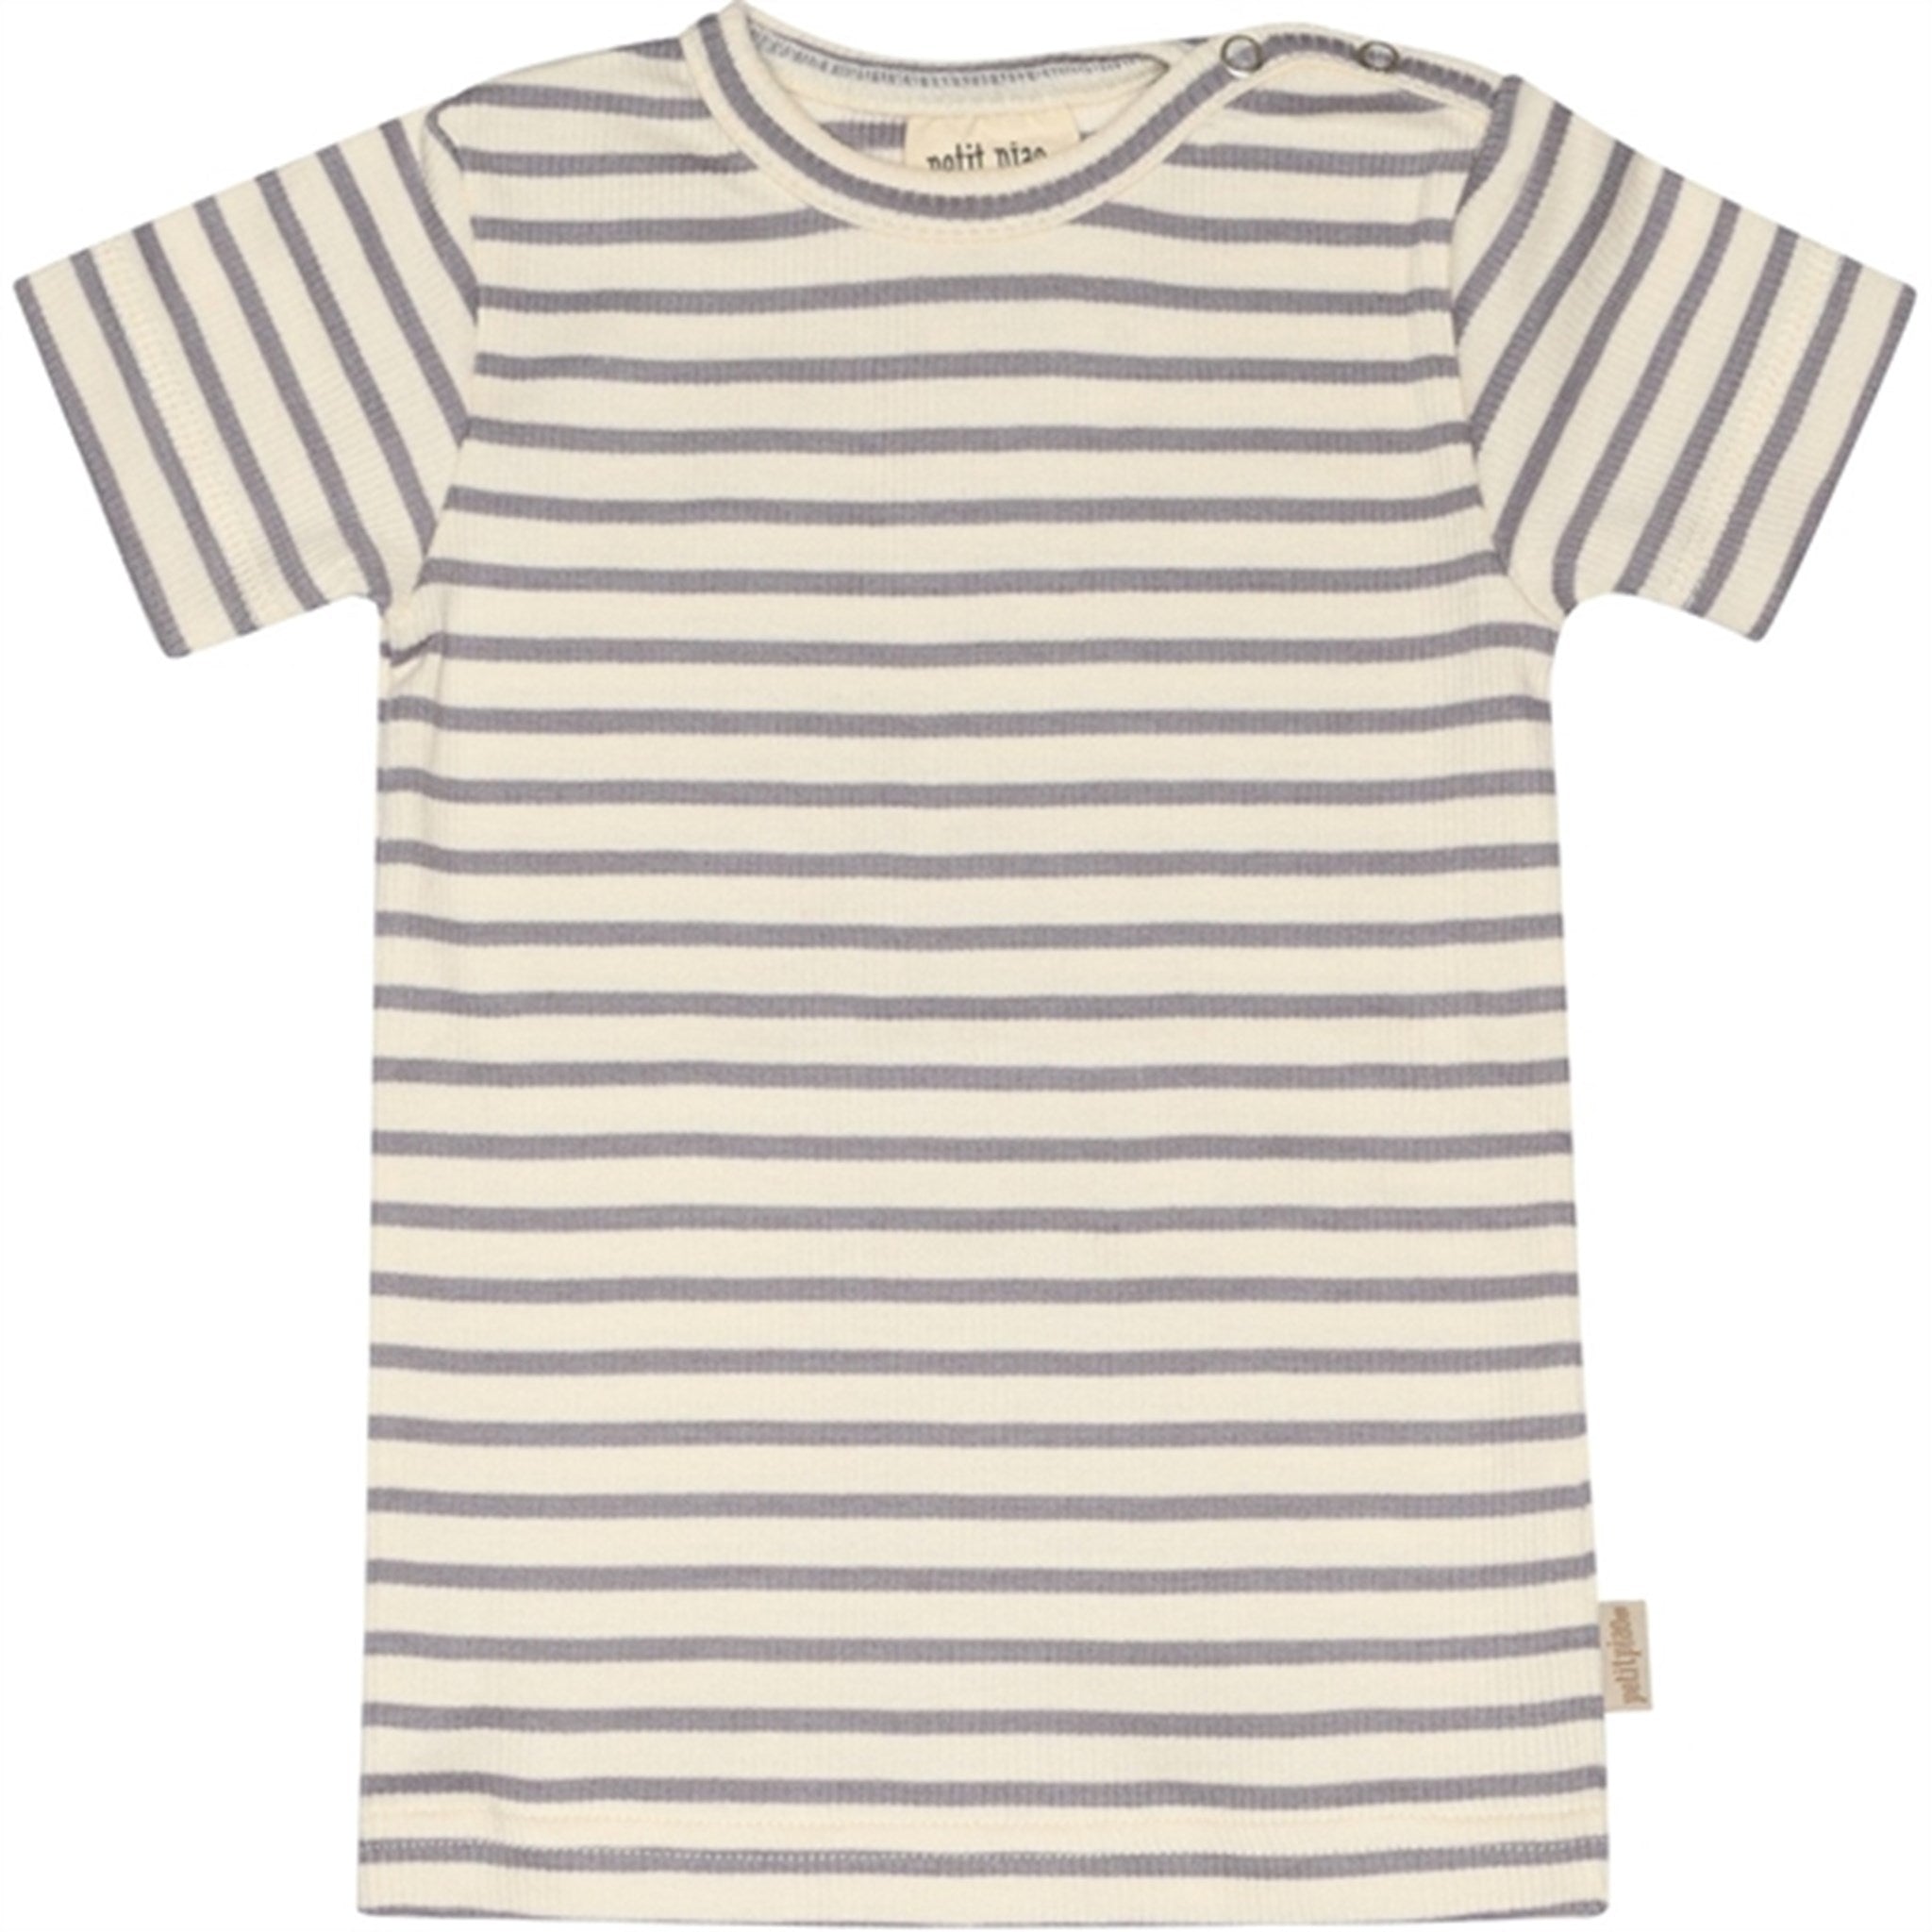 Petit Piao Dusty Lavender/Offwhite T-shirt S/S Modal Striped